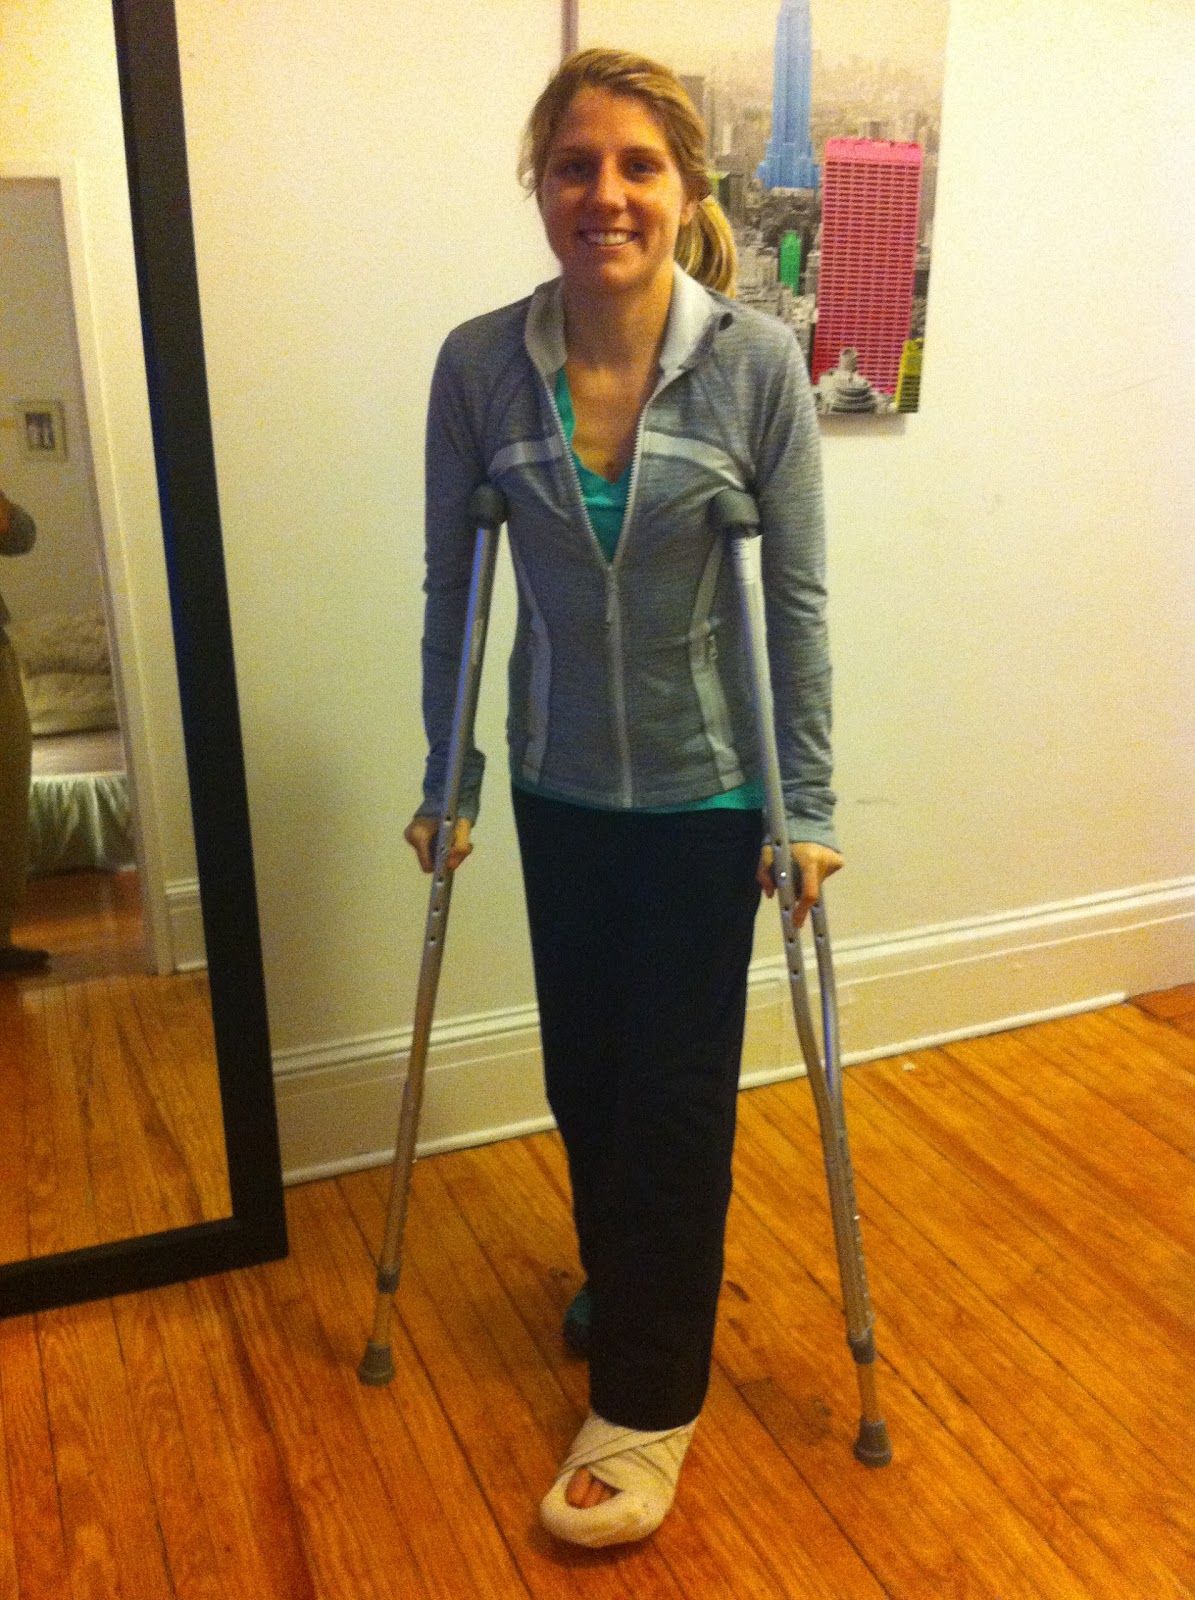 RUNNING ON CRUTCHES: Grocery Shopping